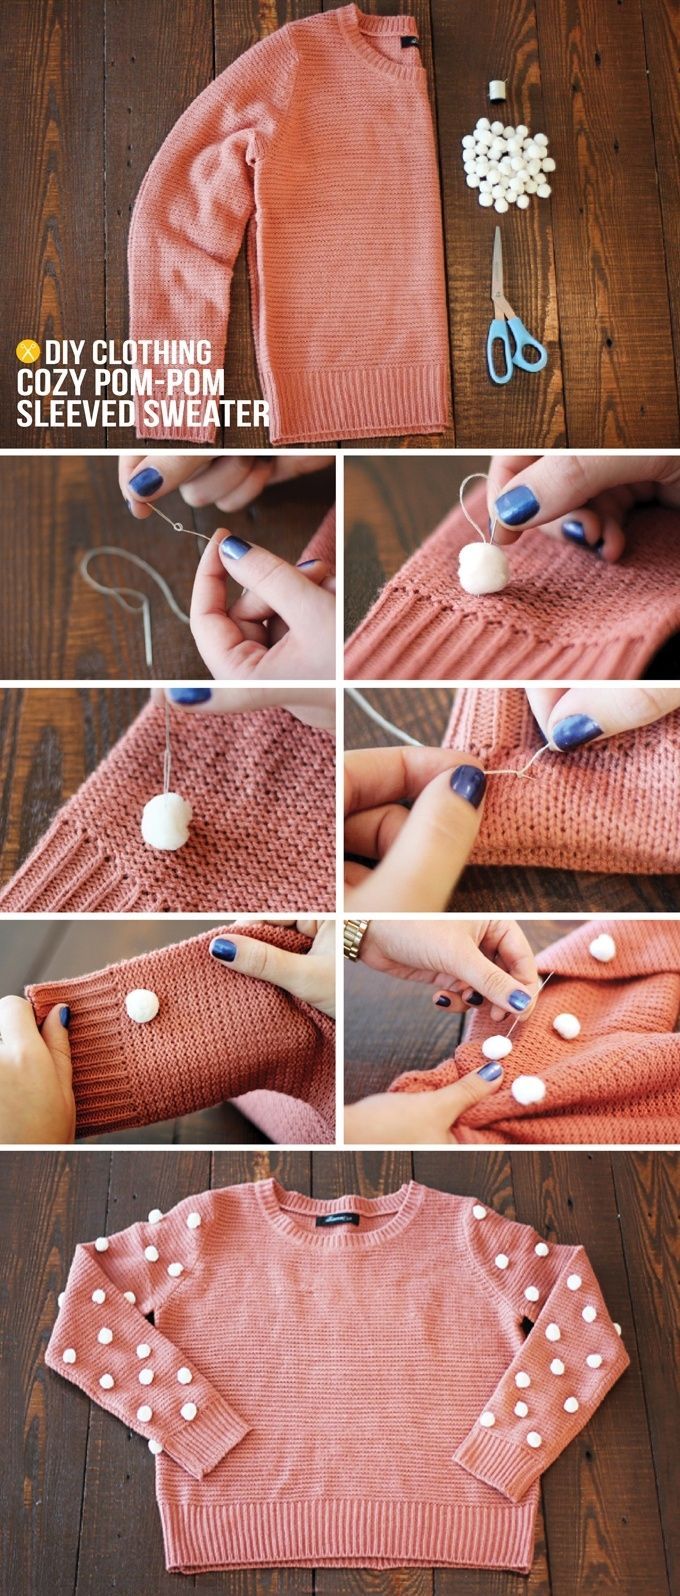 DIY Pom Pom Sweater - DIY Pom Pom Sweater -   17 diy Clothes for winter ideas